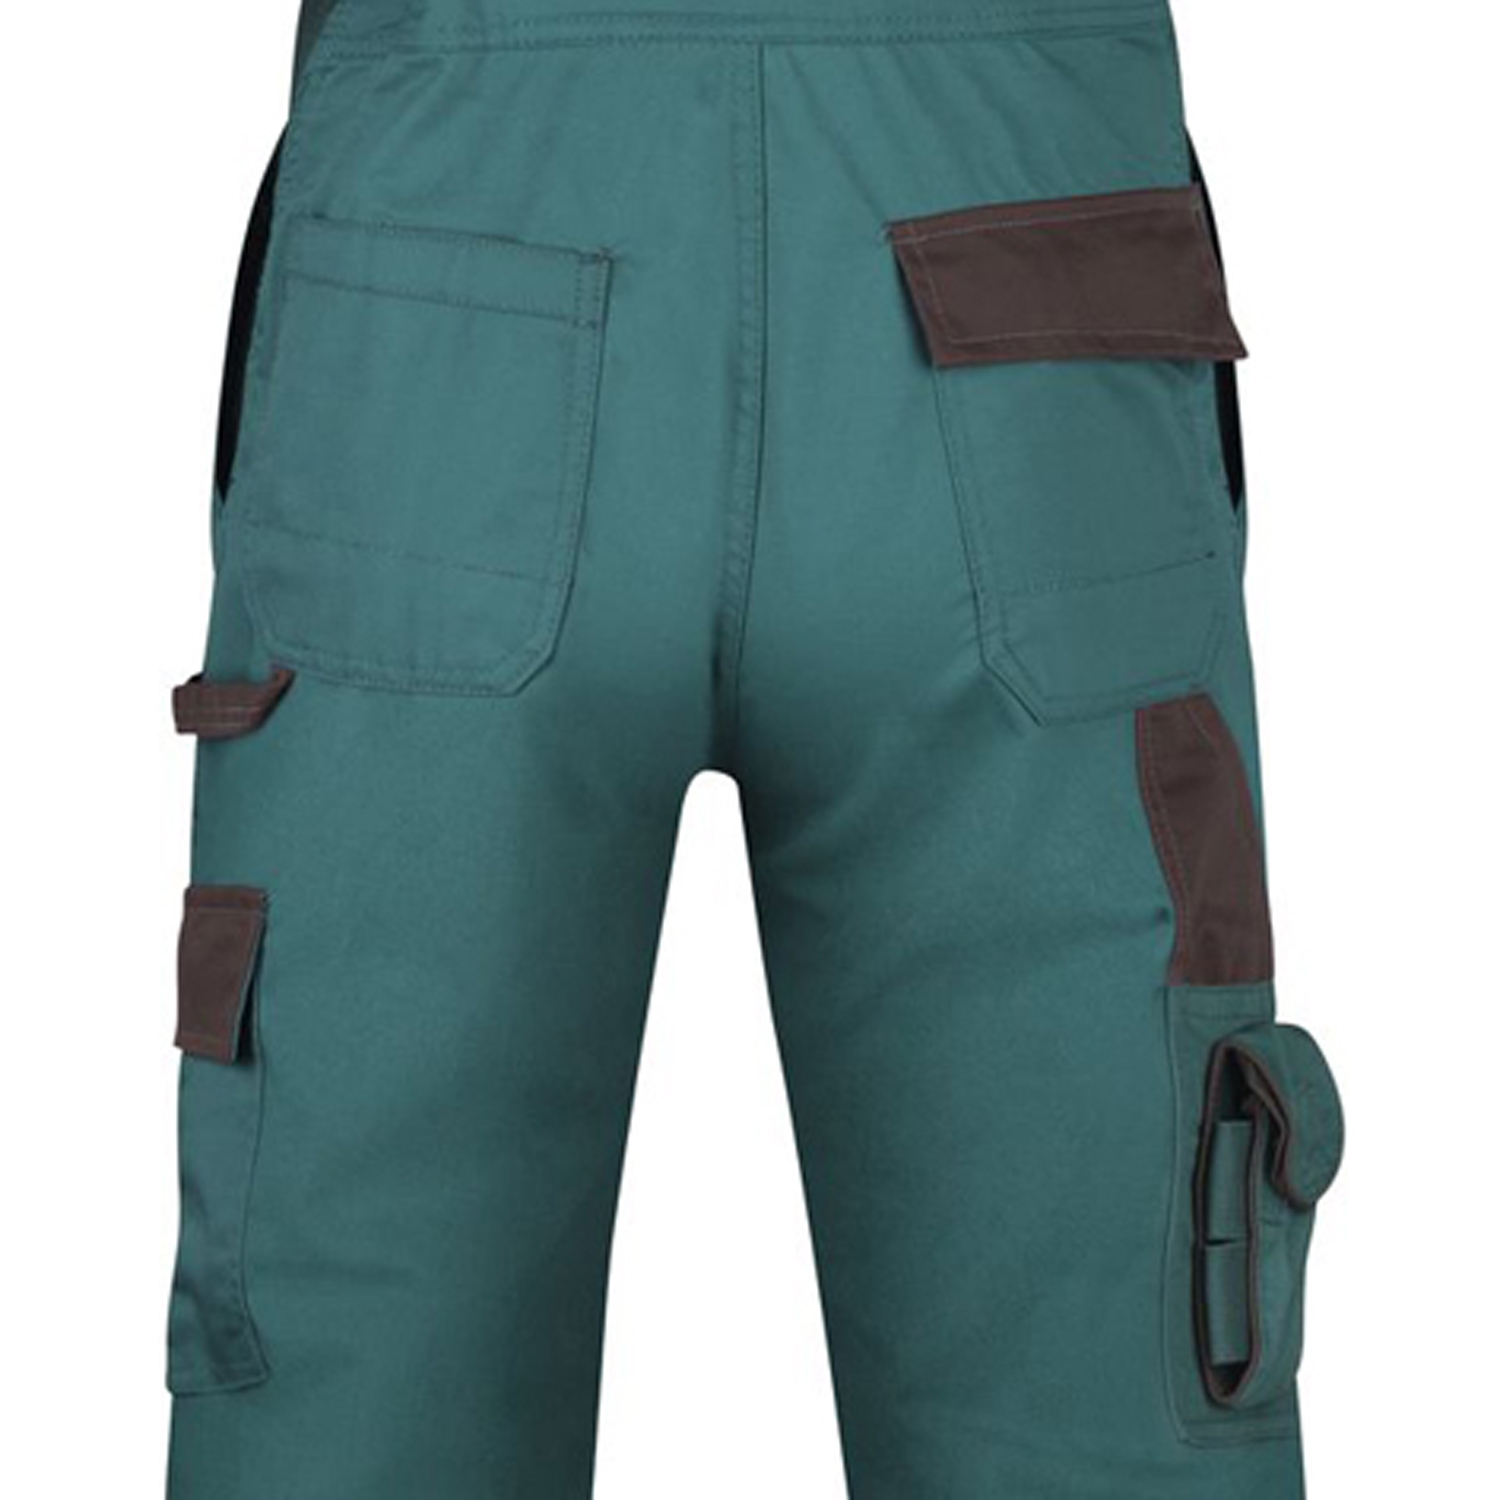 Workingclothes, Pants by PKA Klöcker in green, large sizes up to 74